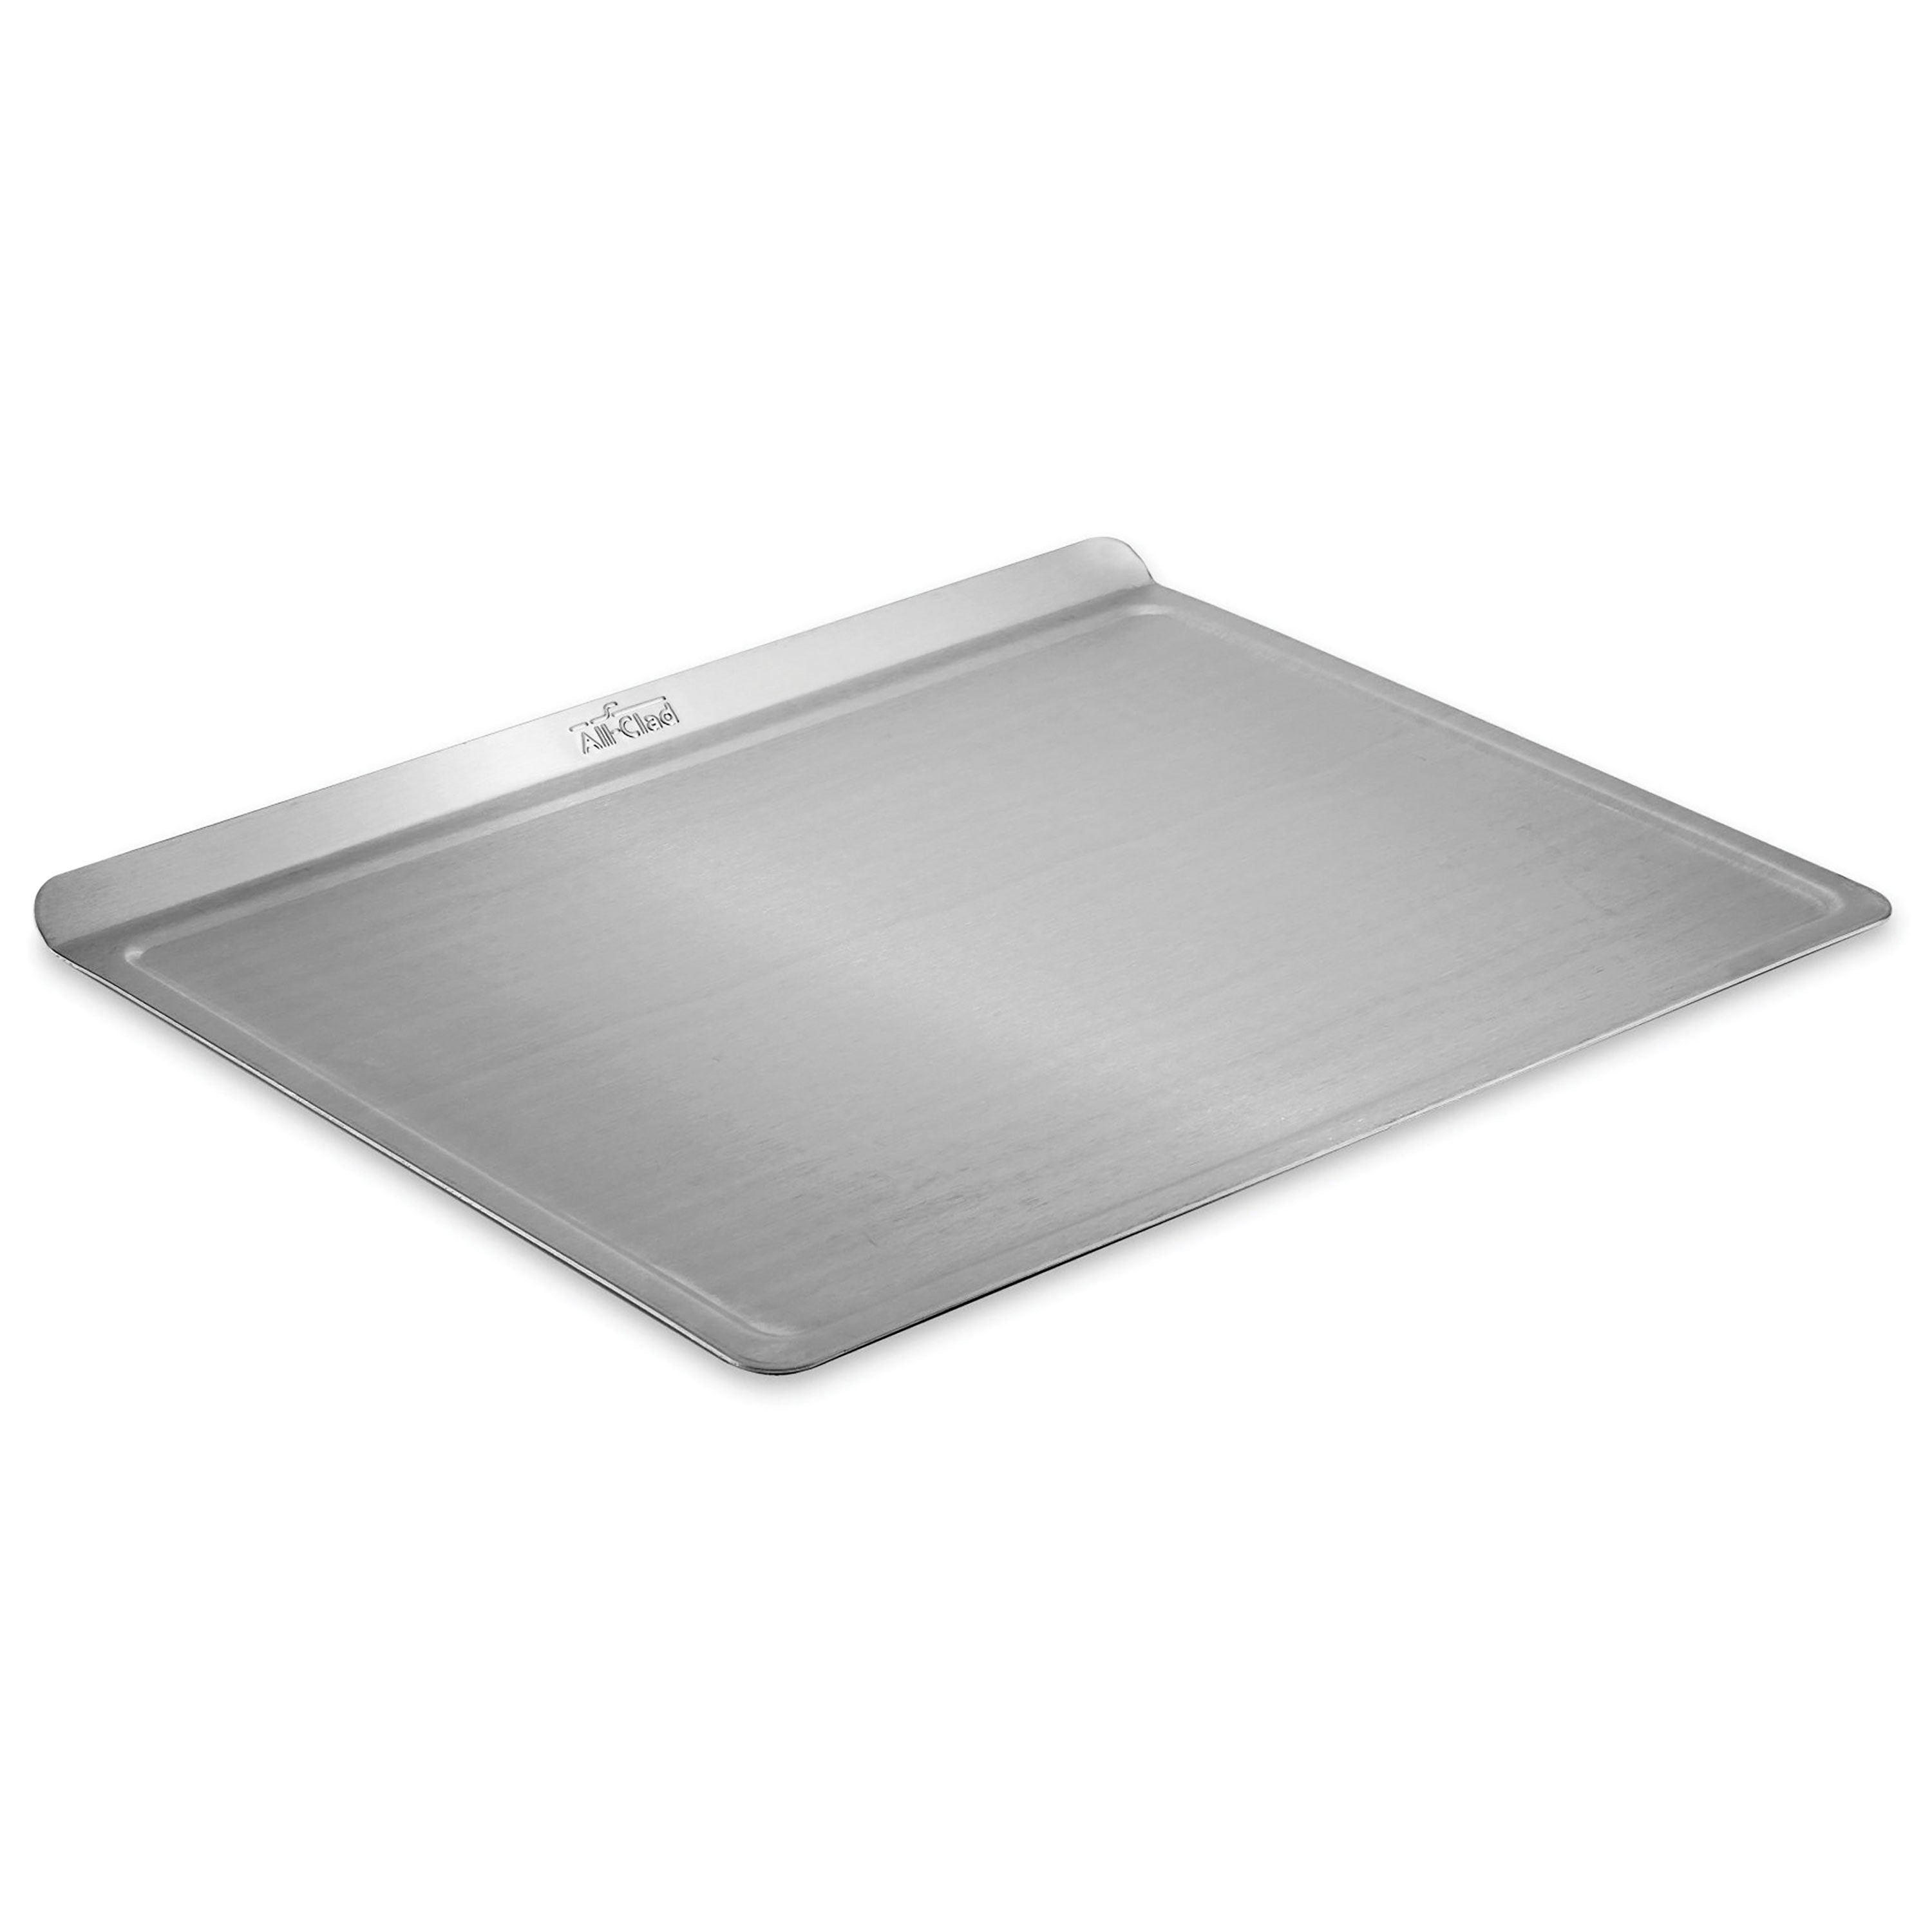 All-Clad d3 Stainless 17.5 x 14 Tri-Ply Baking Sheet